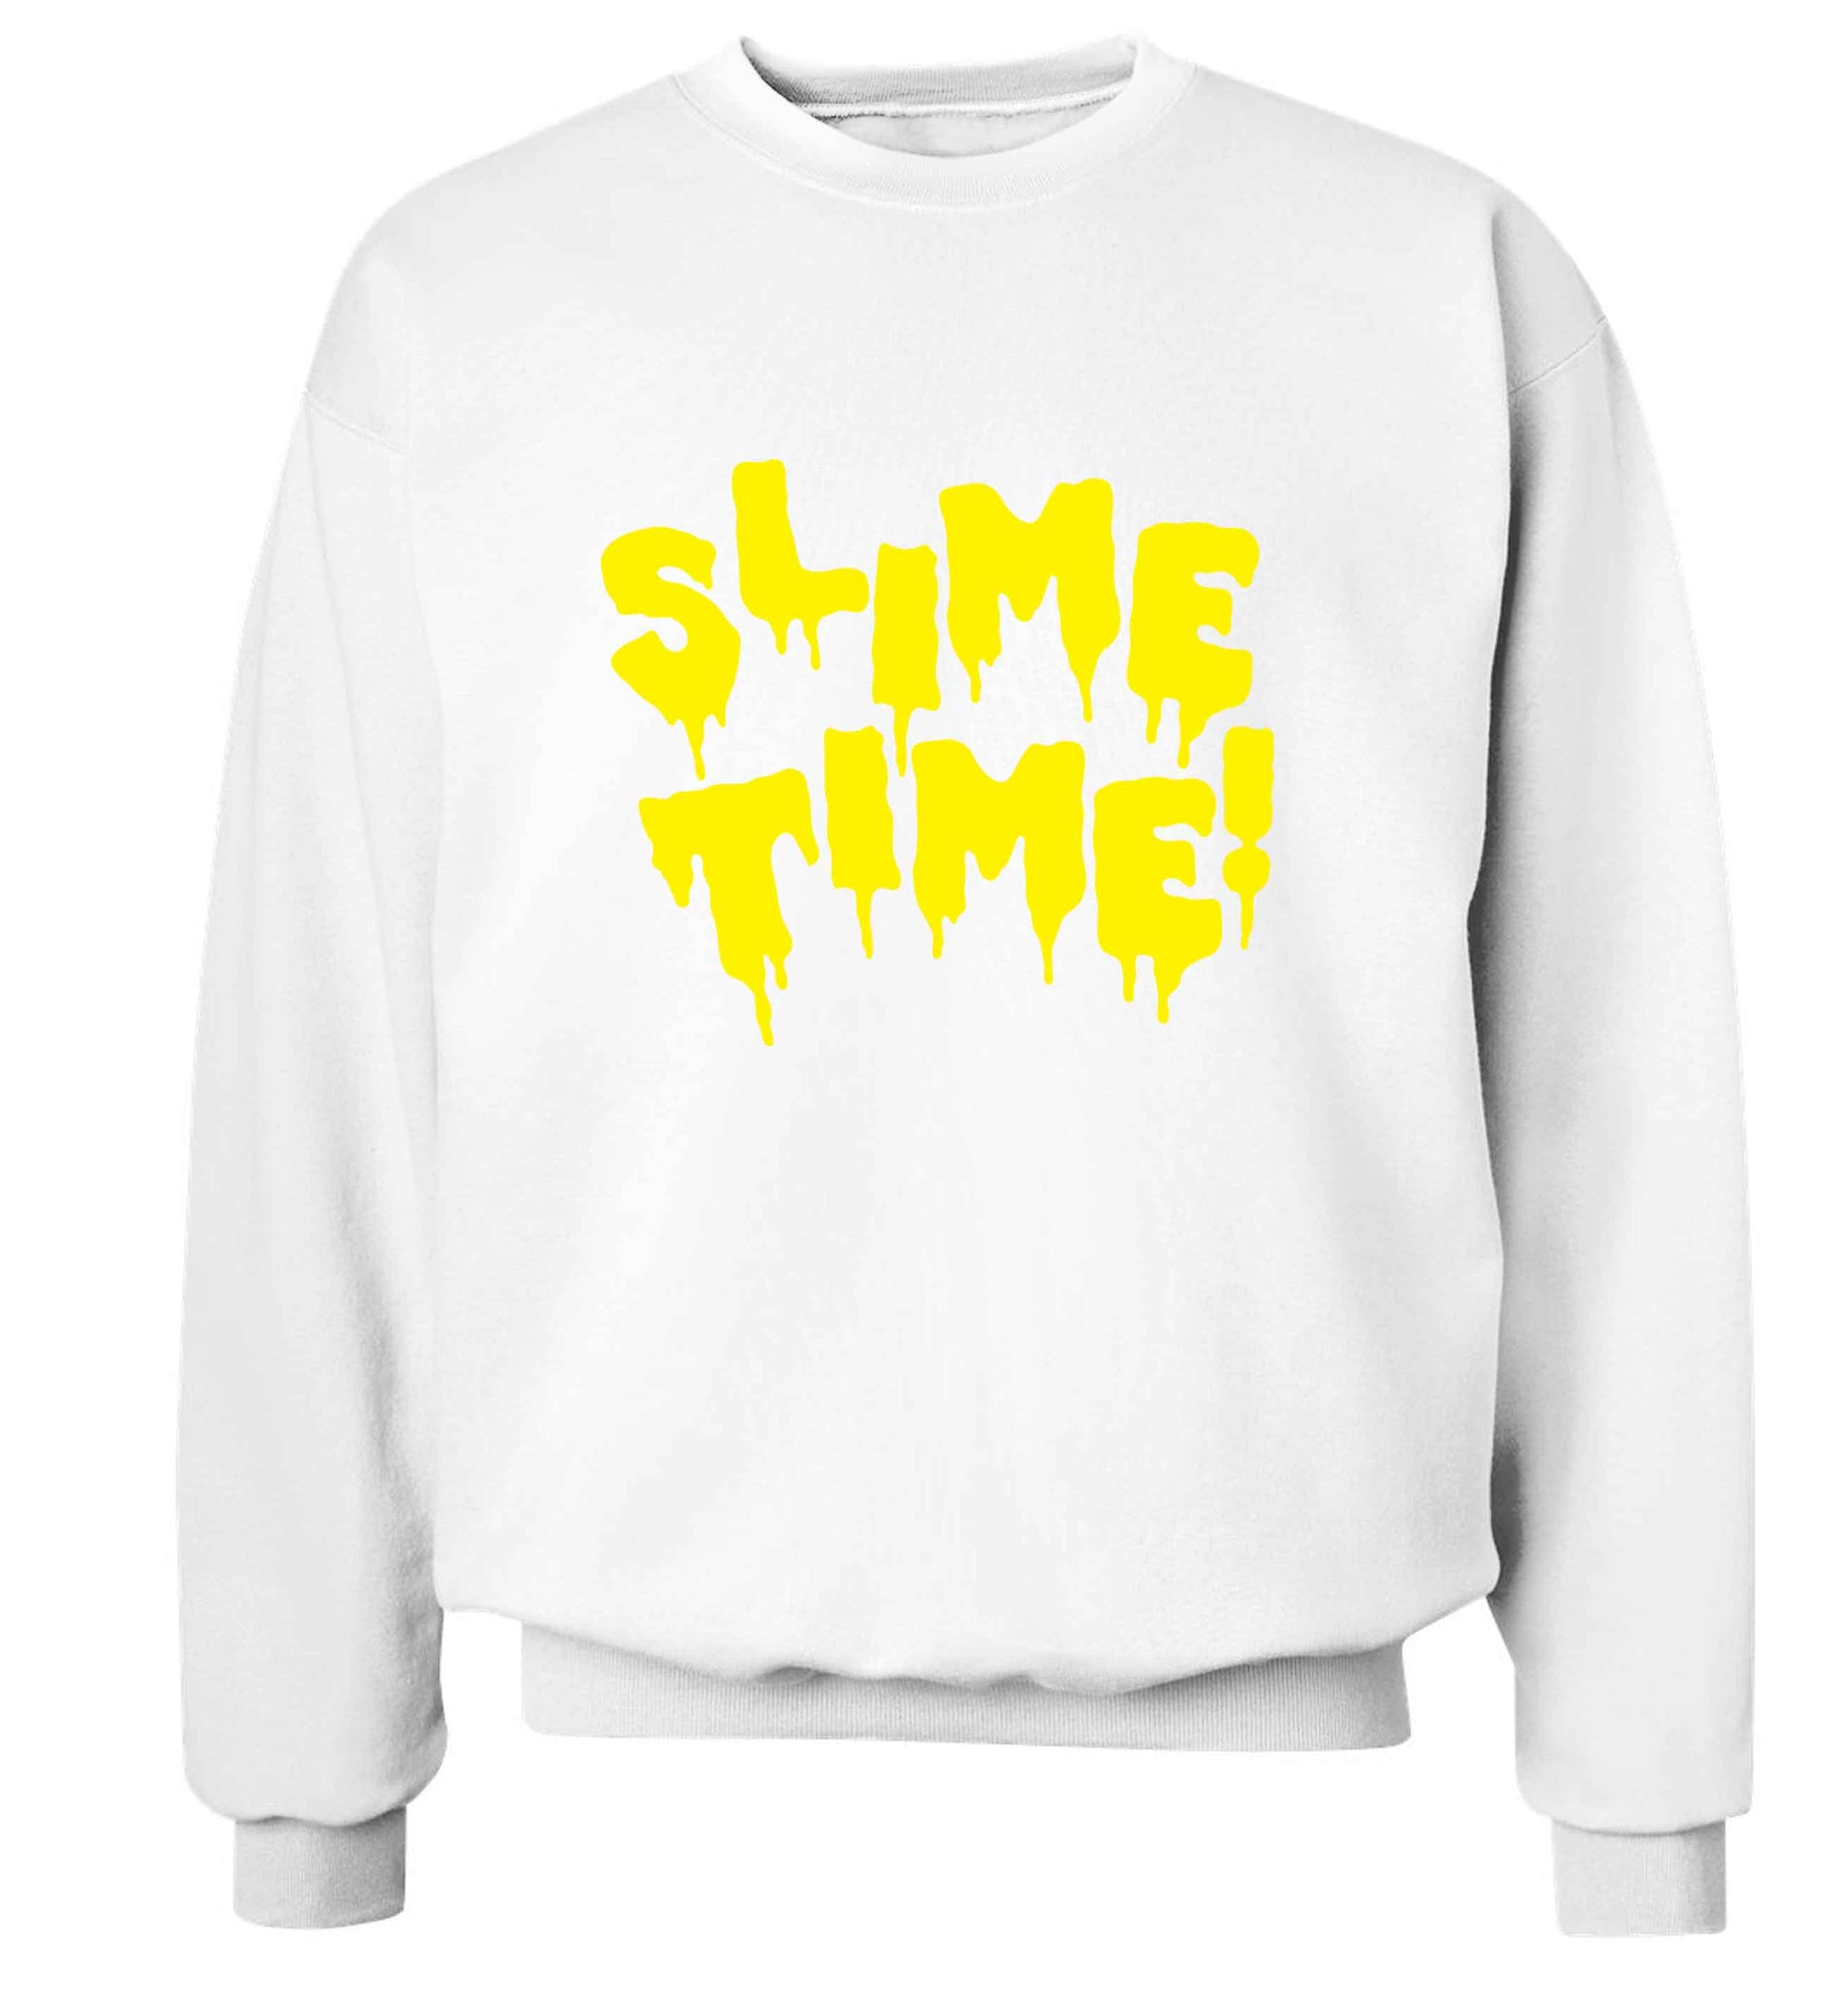 Neon yellow slime time adult's unisex white sweater 2XL